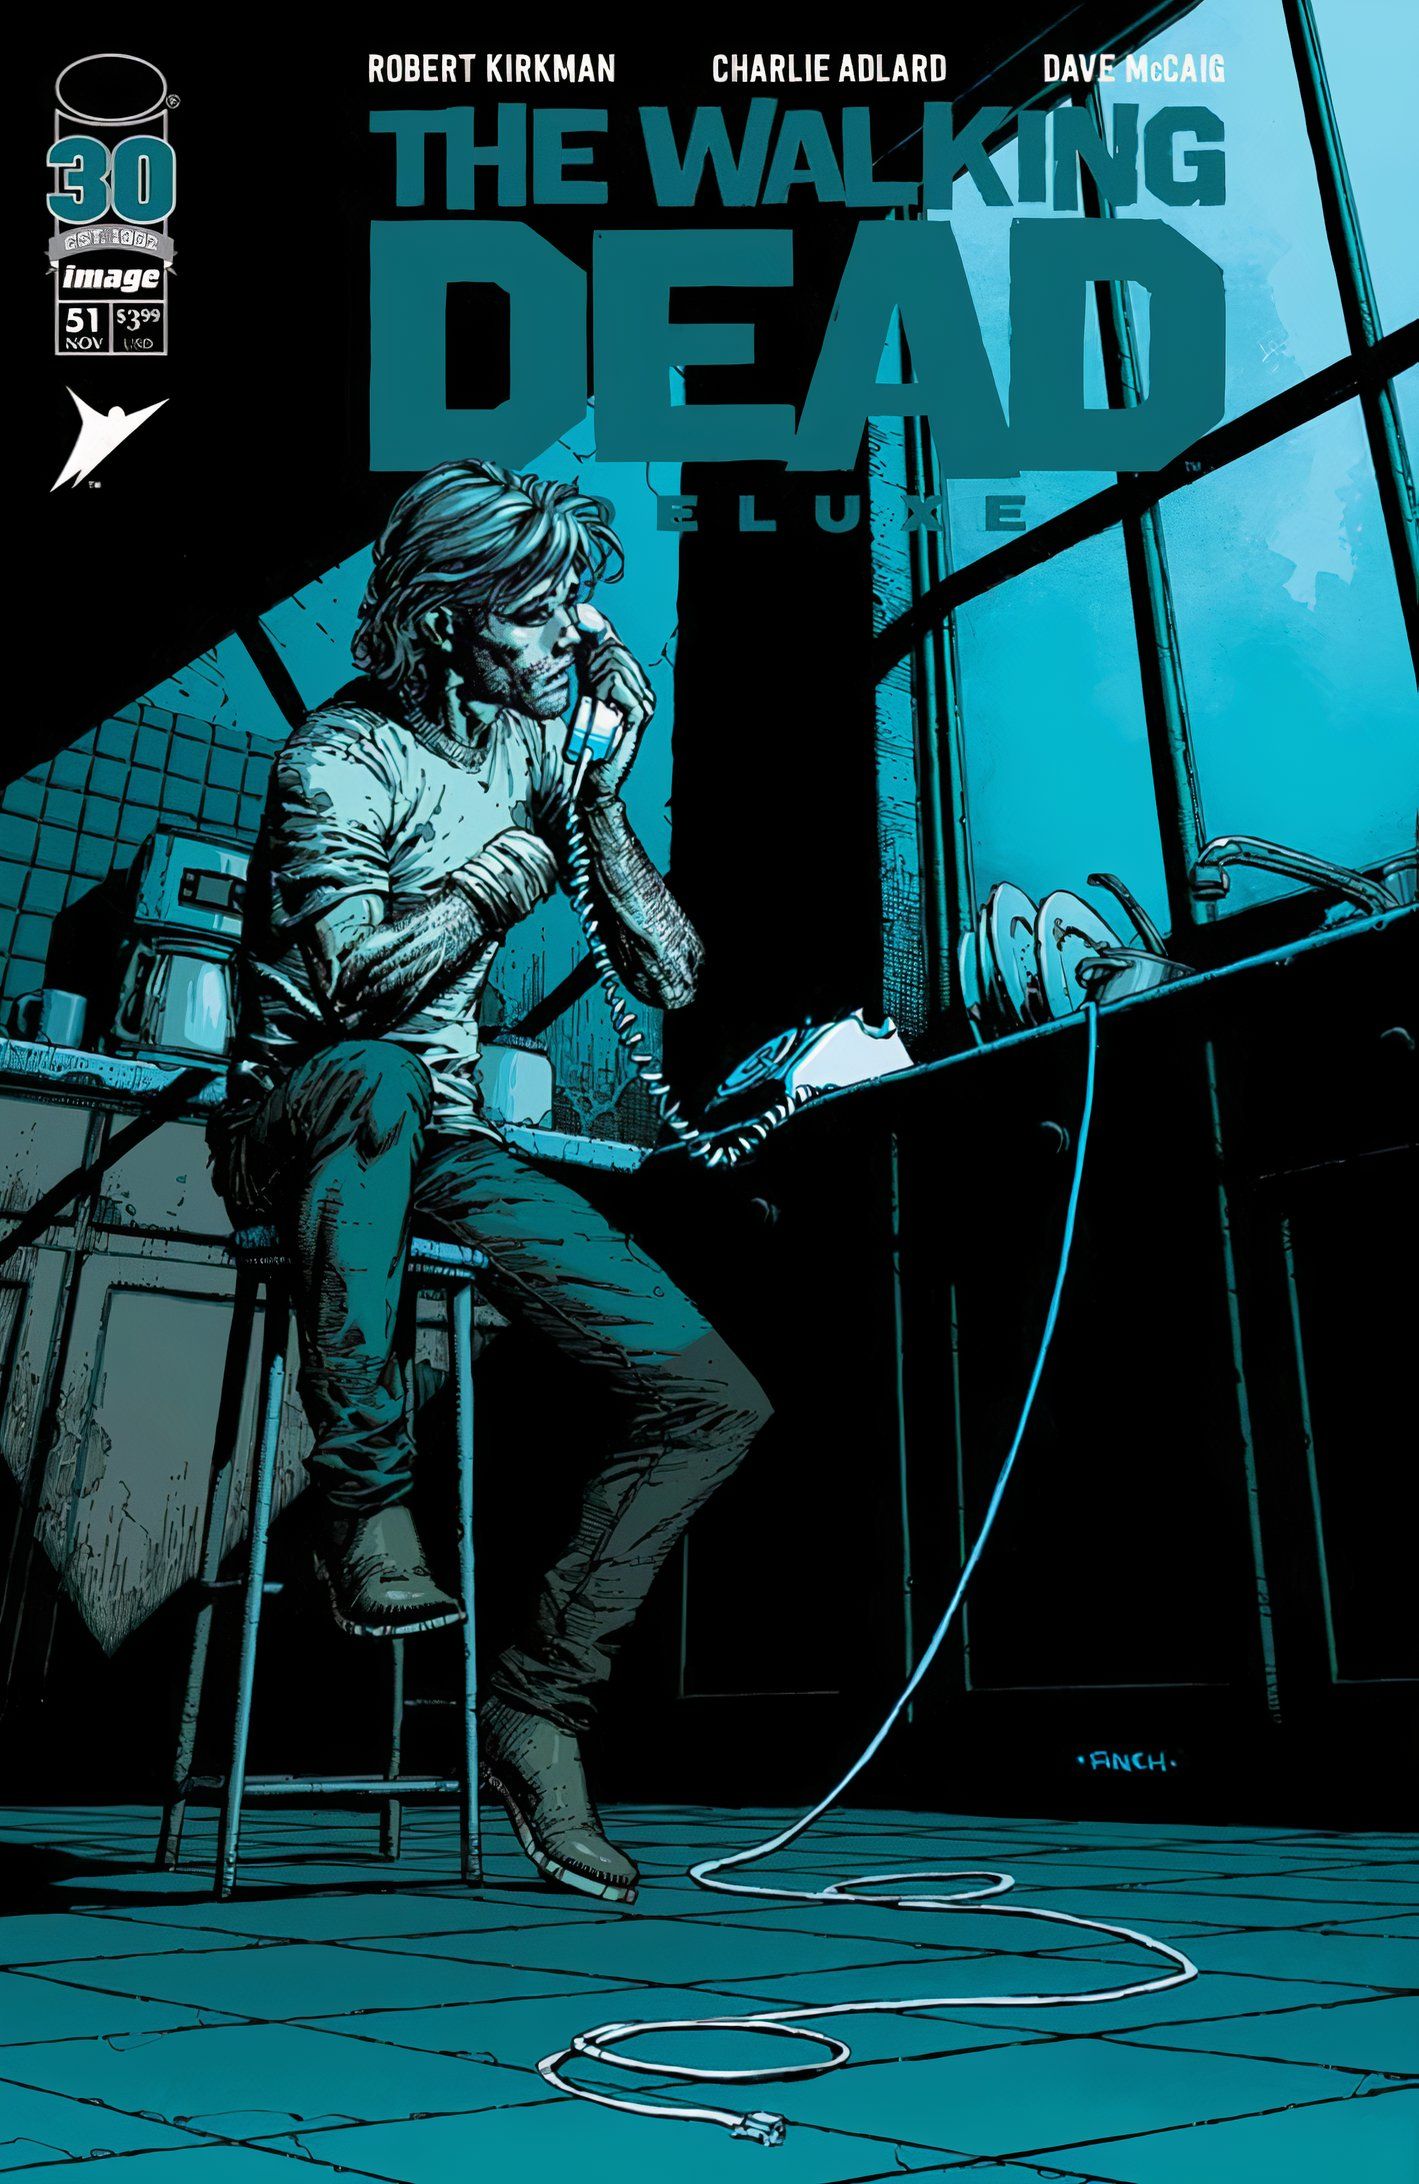 The Walking Dead Deluxe #51 cover, featuring Rick in the kitchen of a dilapidated house talking on a broken phone